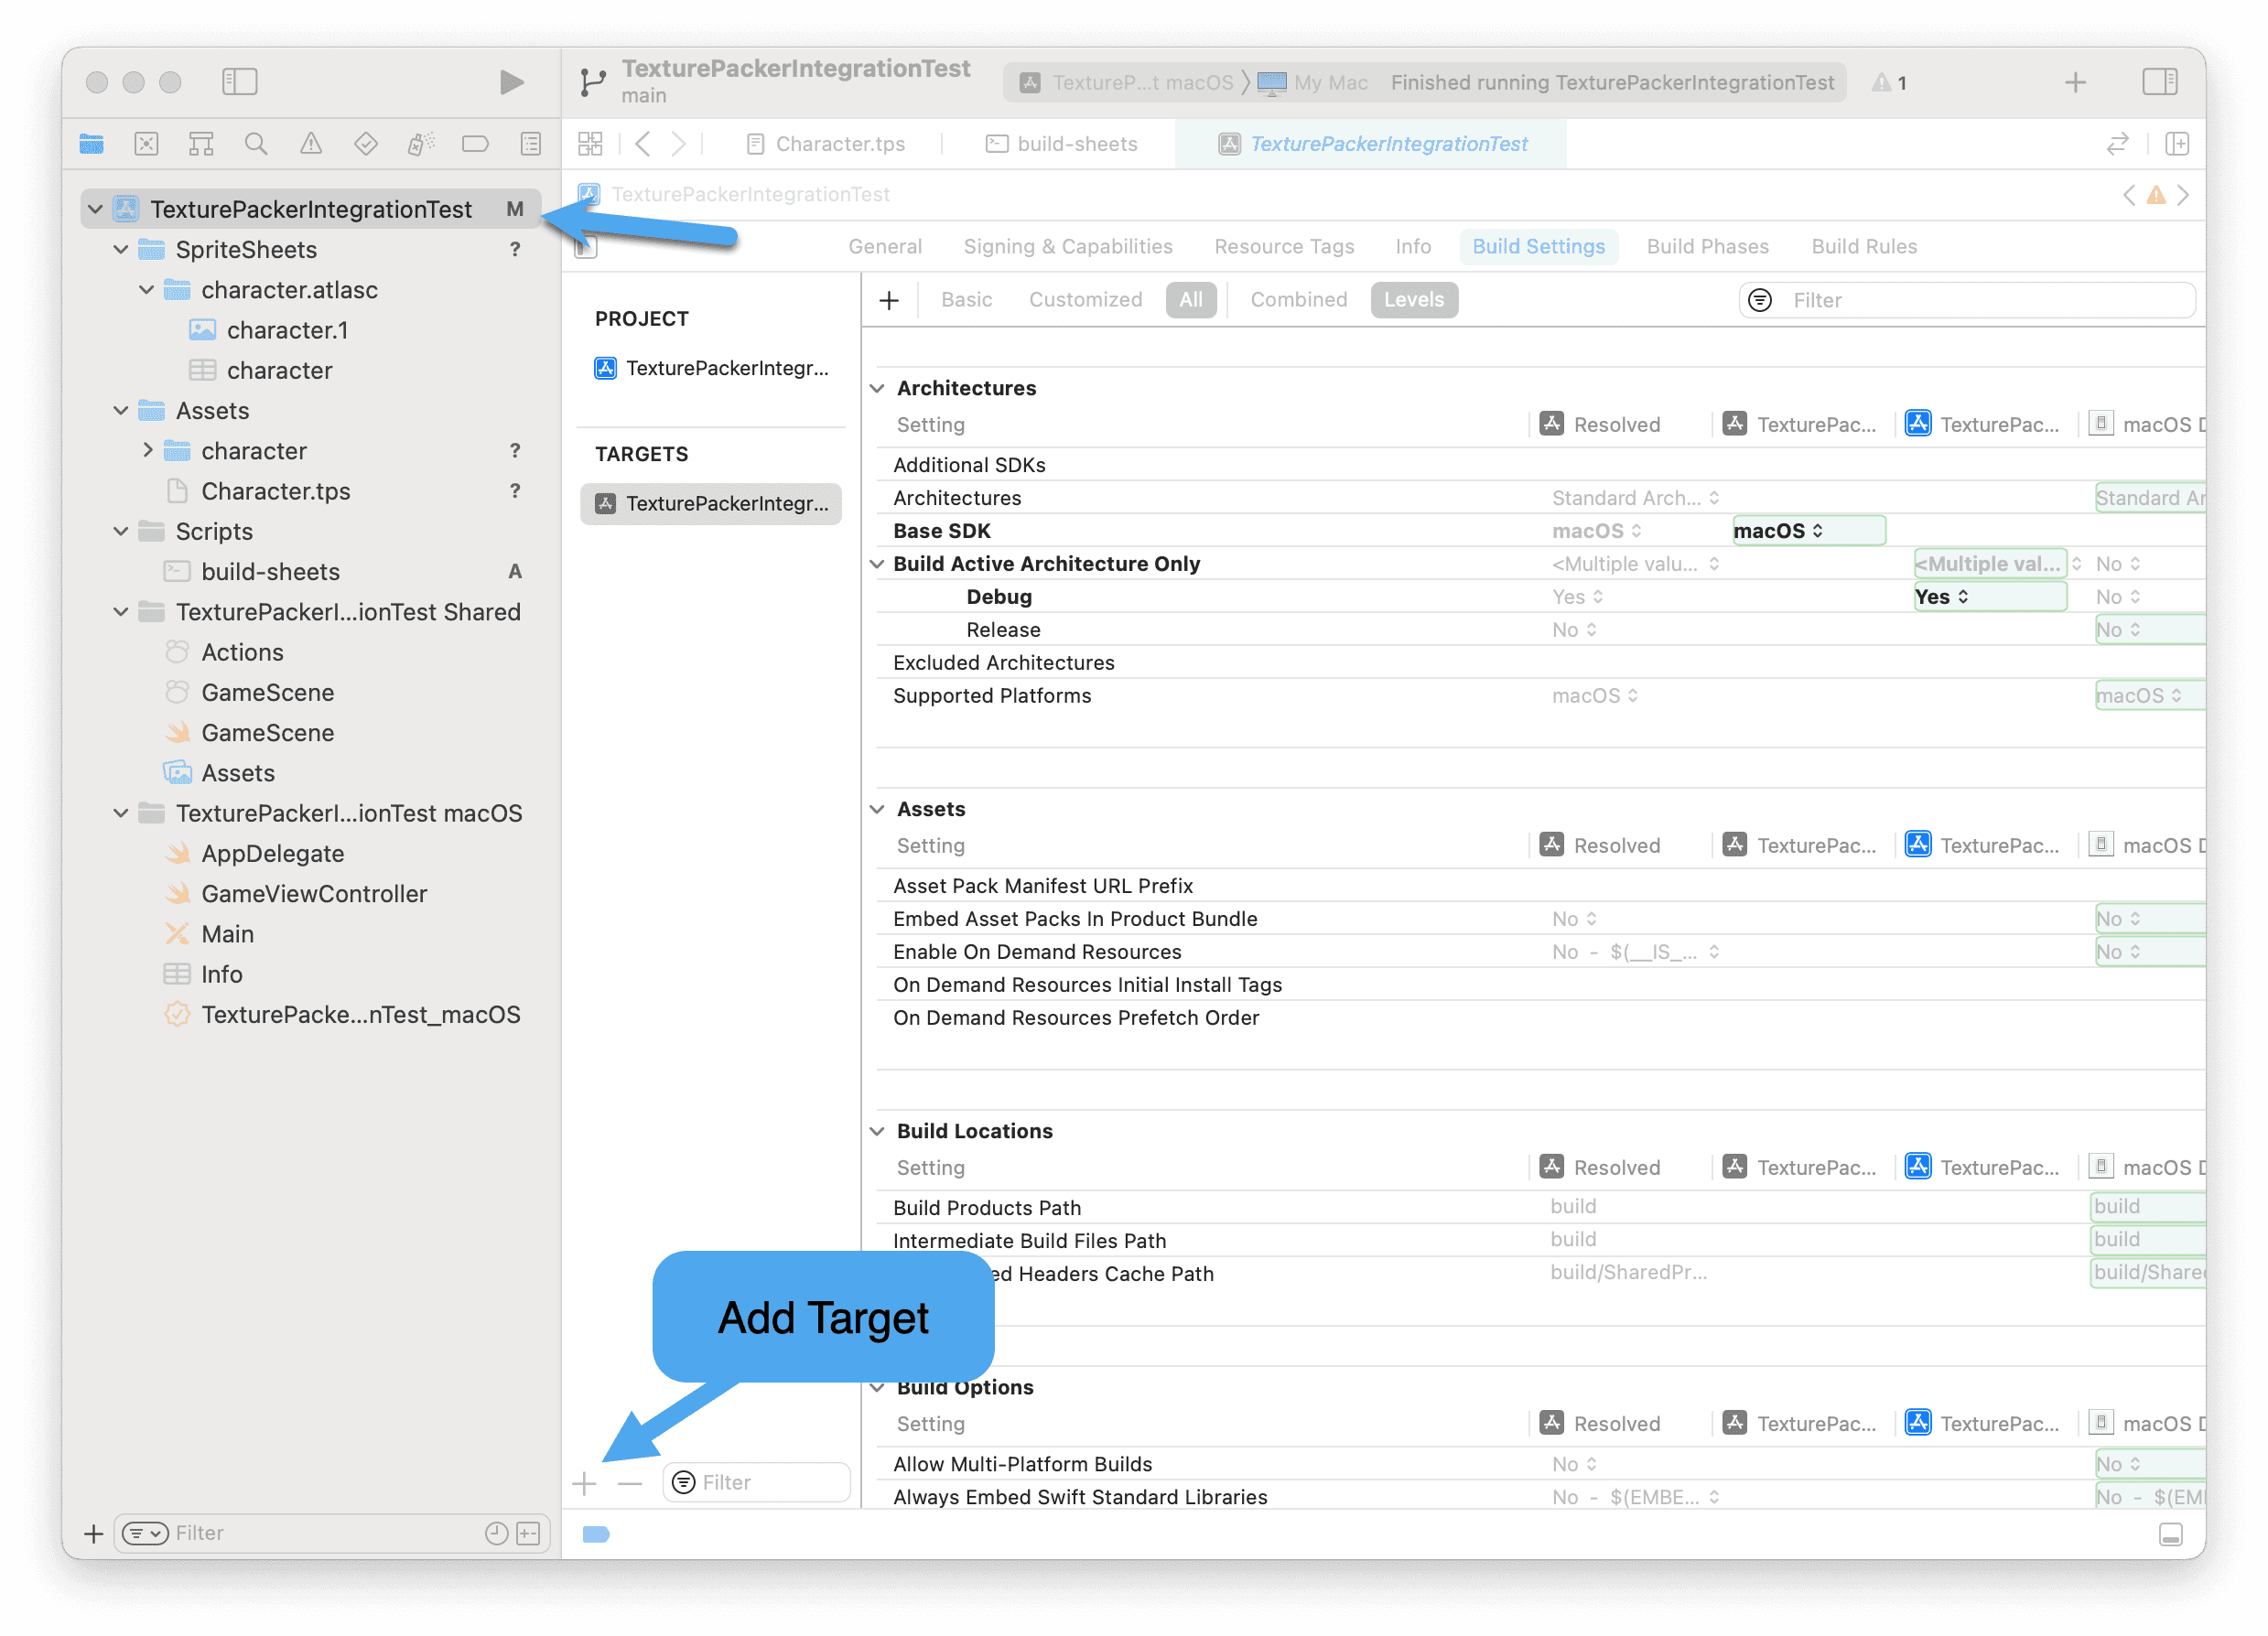 Add a new target to the Xcode project